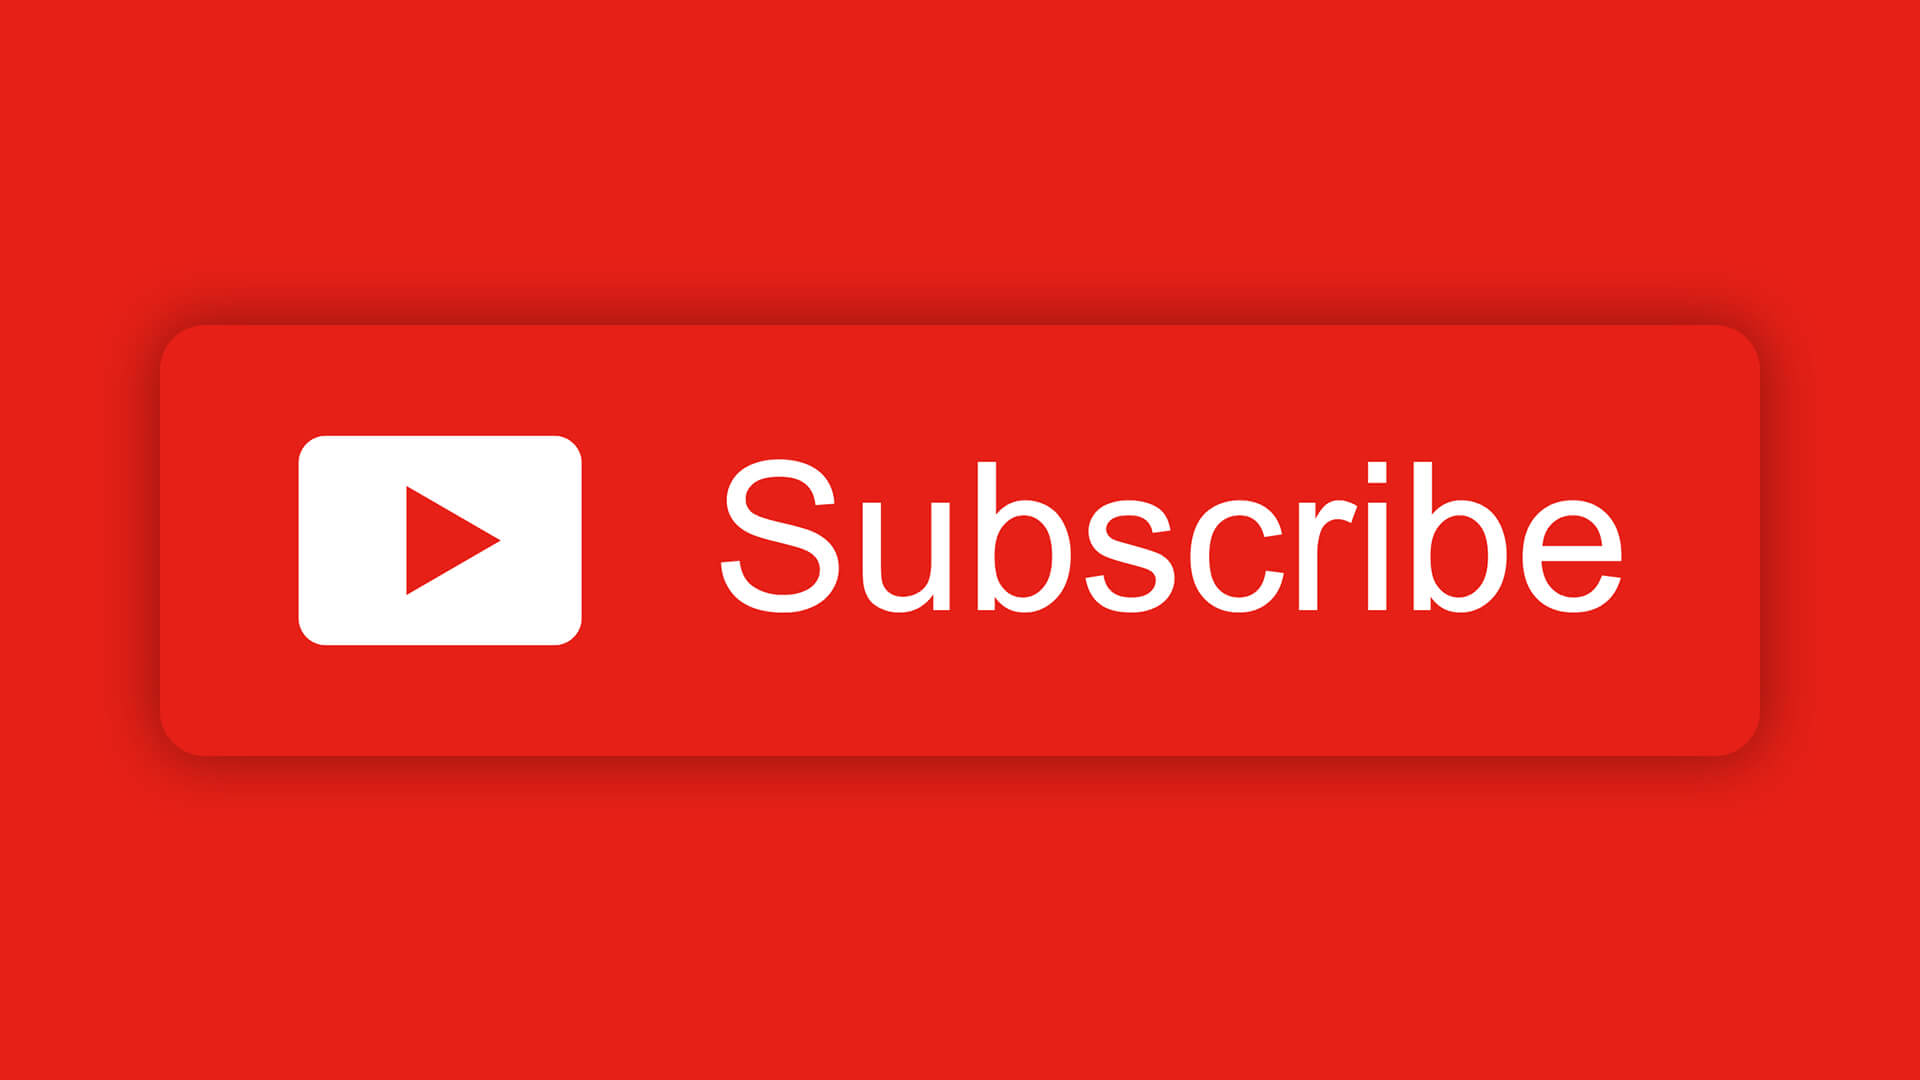 Free-YouTube-Subscribe-Button-Download-Design-Inspiration-By-AlfredoCreates-4